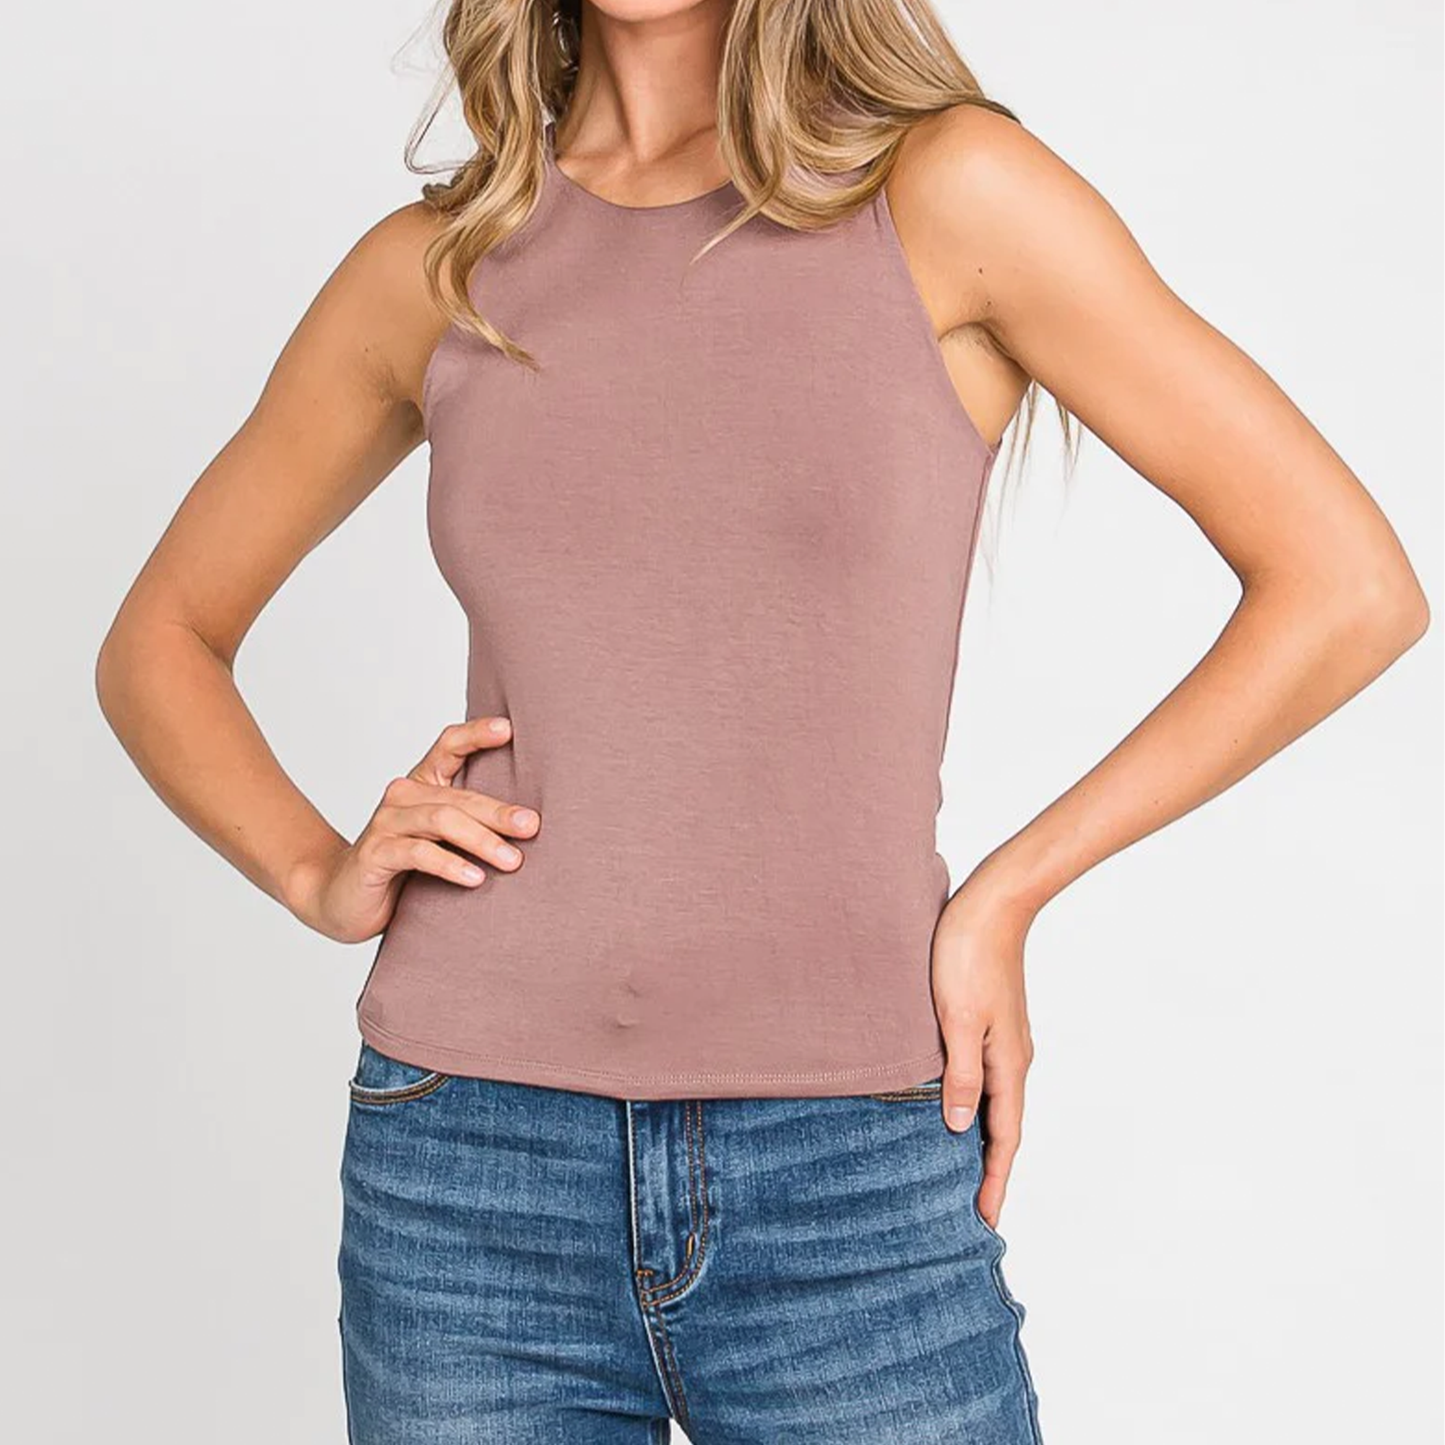 Moonbeam Round Neck Long Basic Knit Tank. Keep the basics around because they are the key to building the perfect wardrobe. this basic tank is soft to the touch and stretchy to flatter many body types. Perfect for layering, this basic tank can go with any outfit